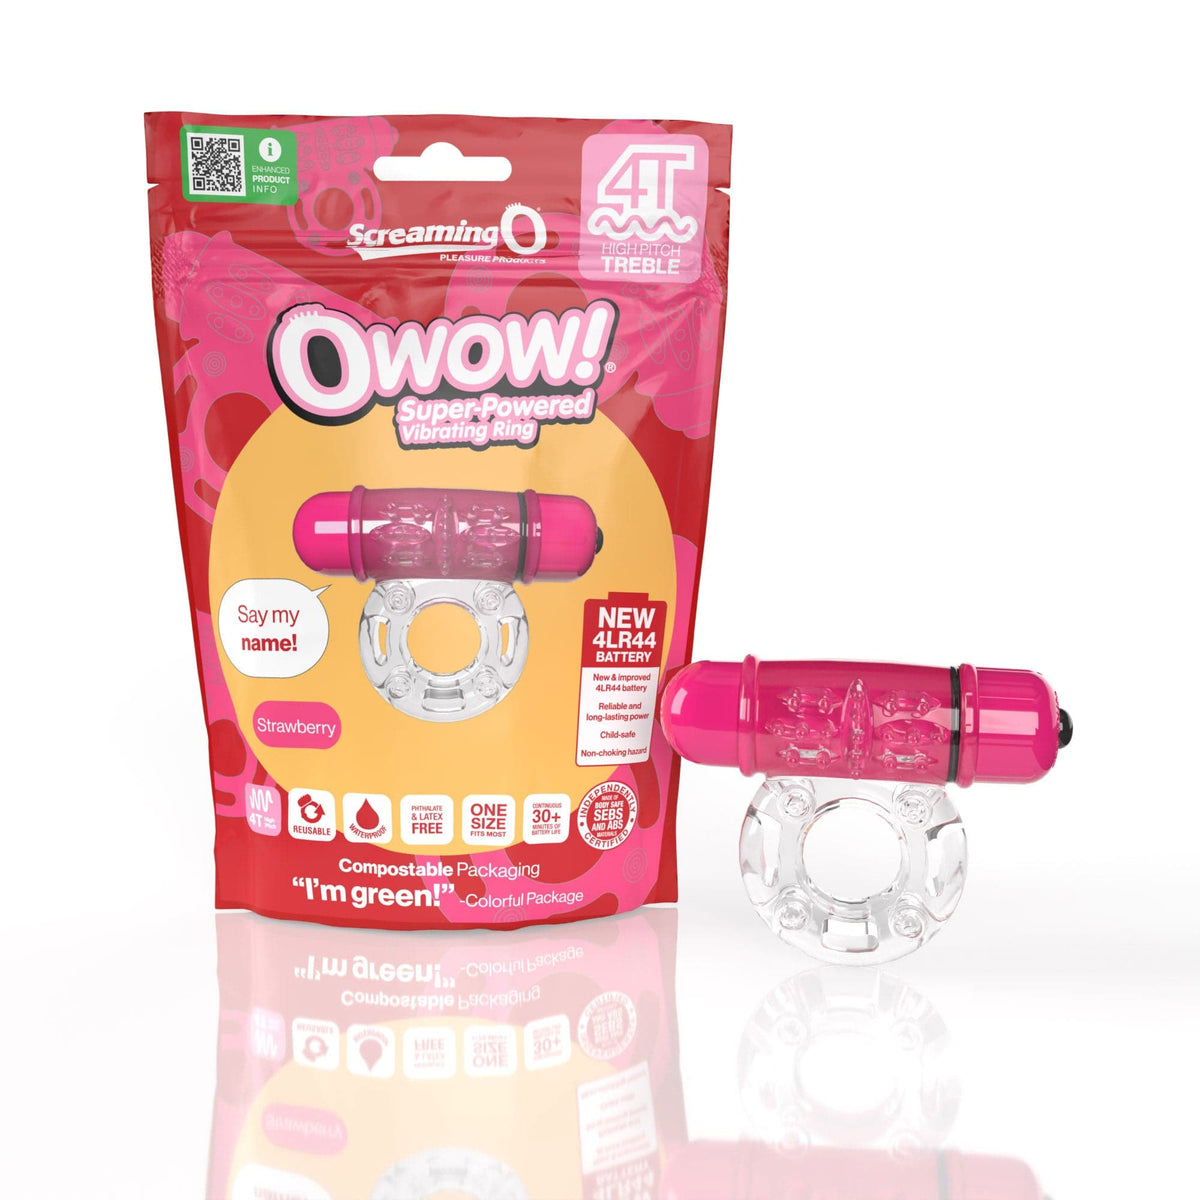 screaming o 4t owow super powered vibrating ring strawberry